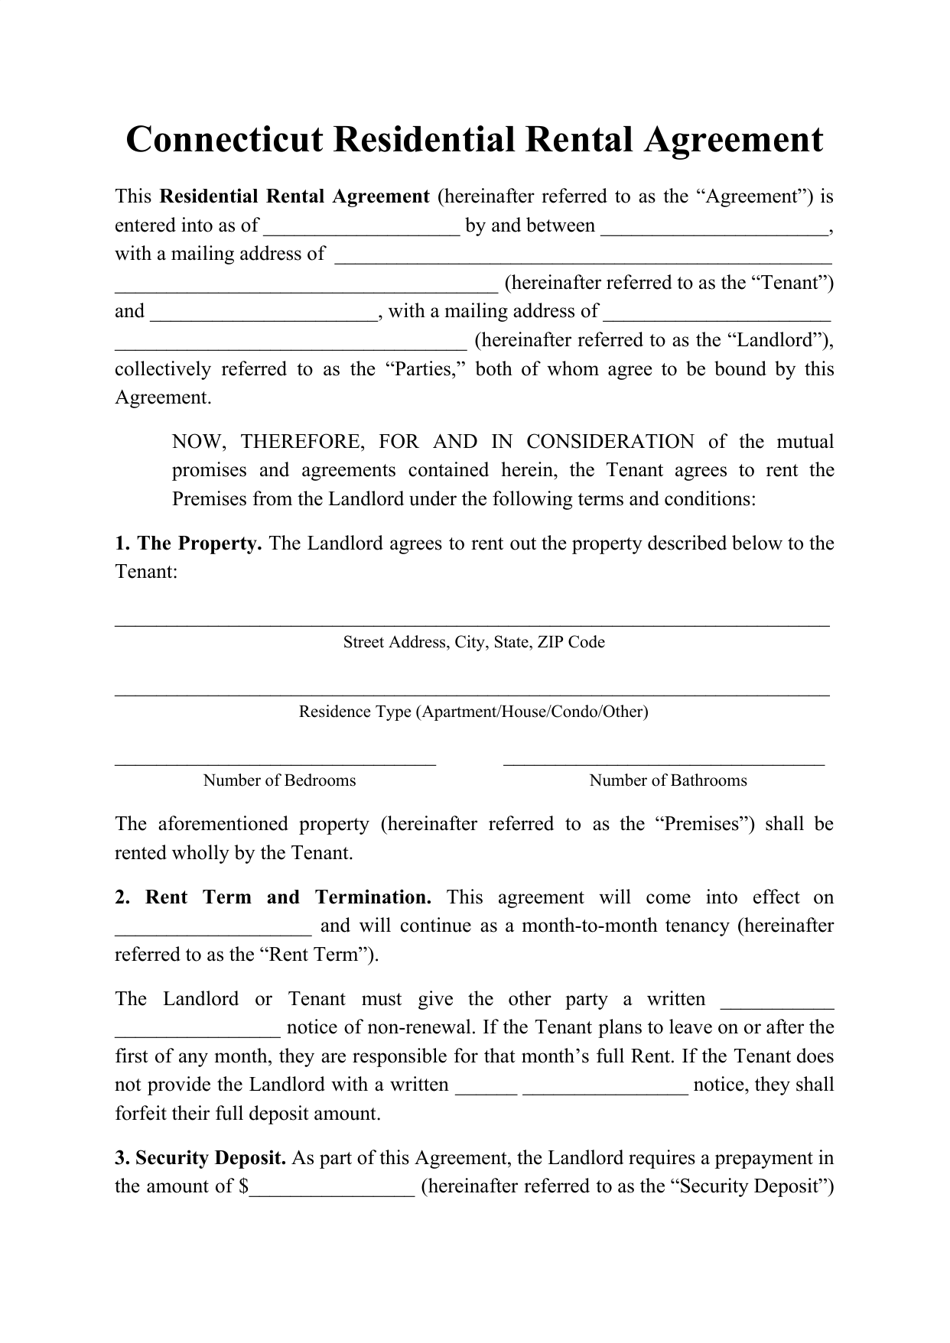 Residential Rental Agreement Template - Connecticut, Page 1